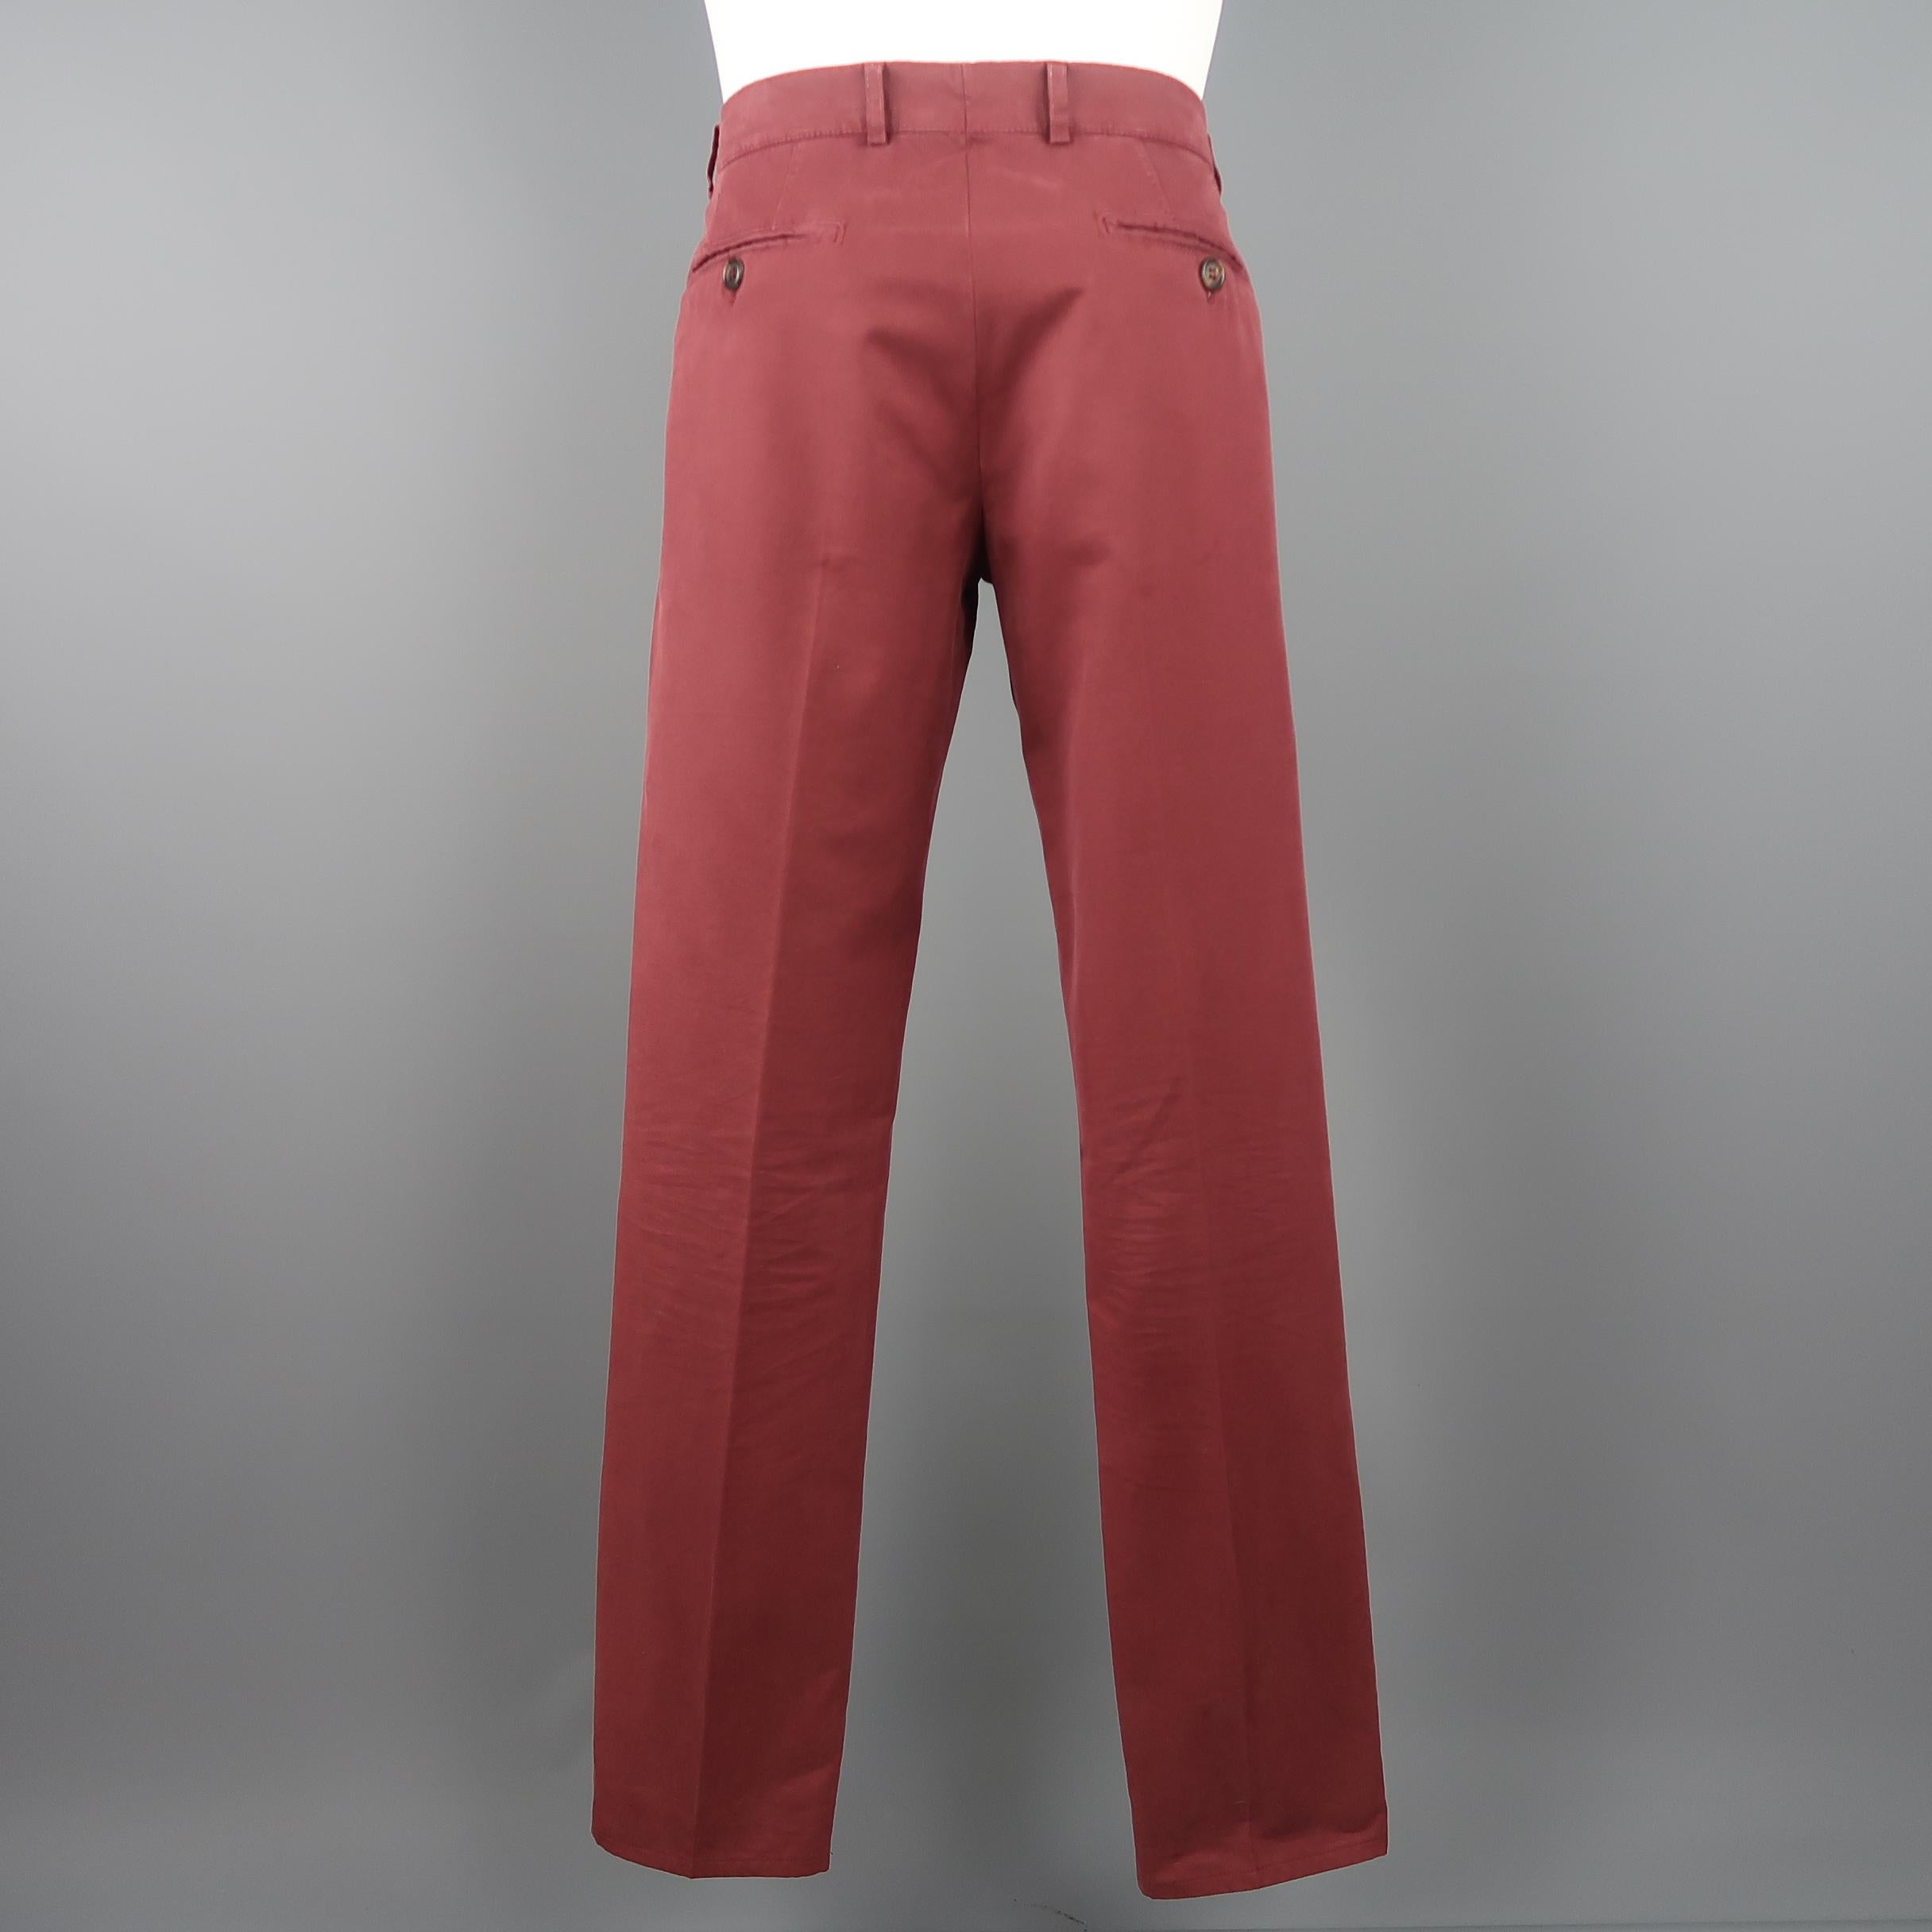 Brown BRUNELLO CUCINELLI Size 34 Burgundy Washed Cotton Chino Pants